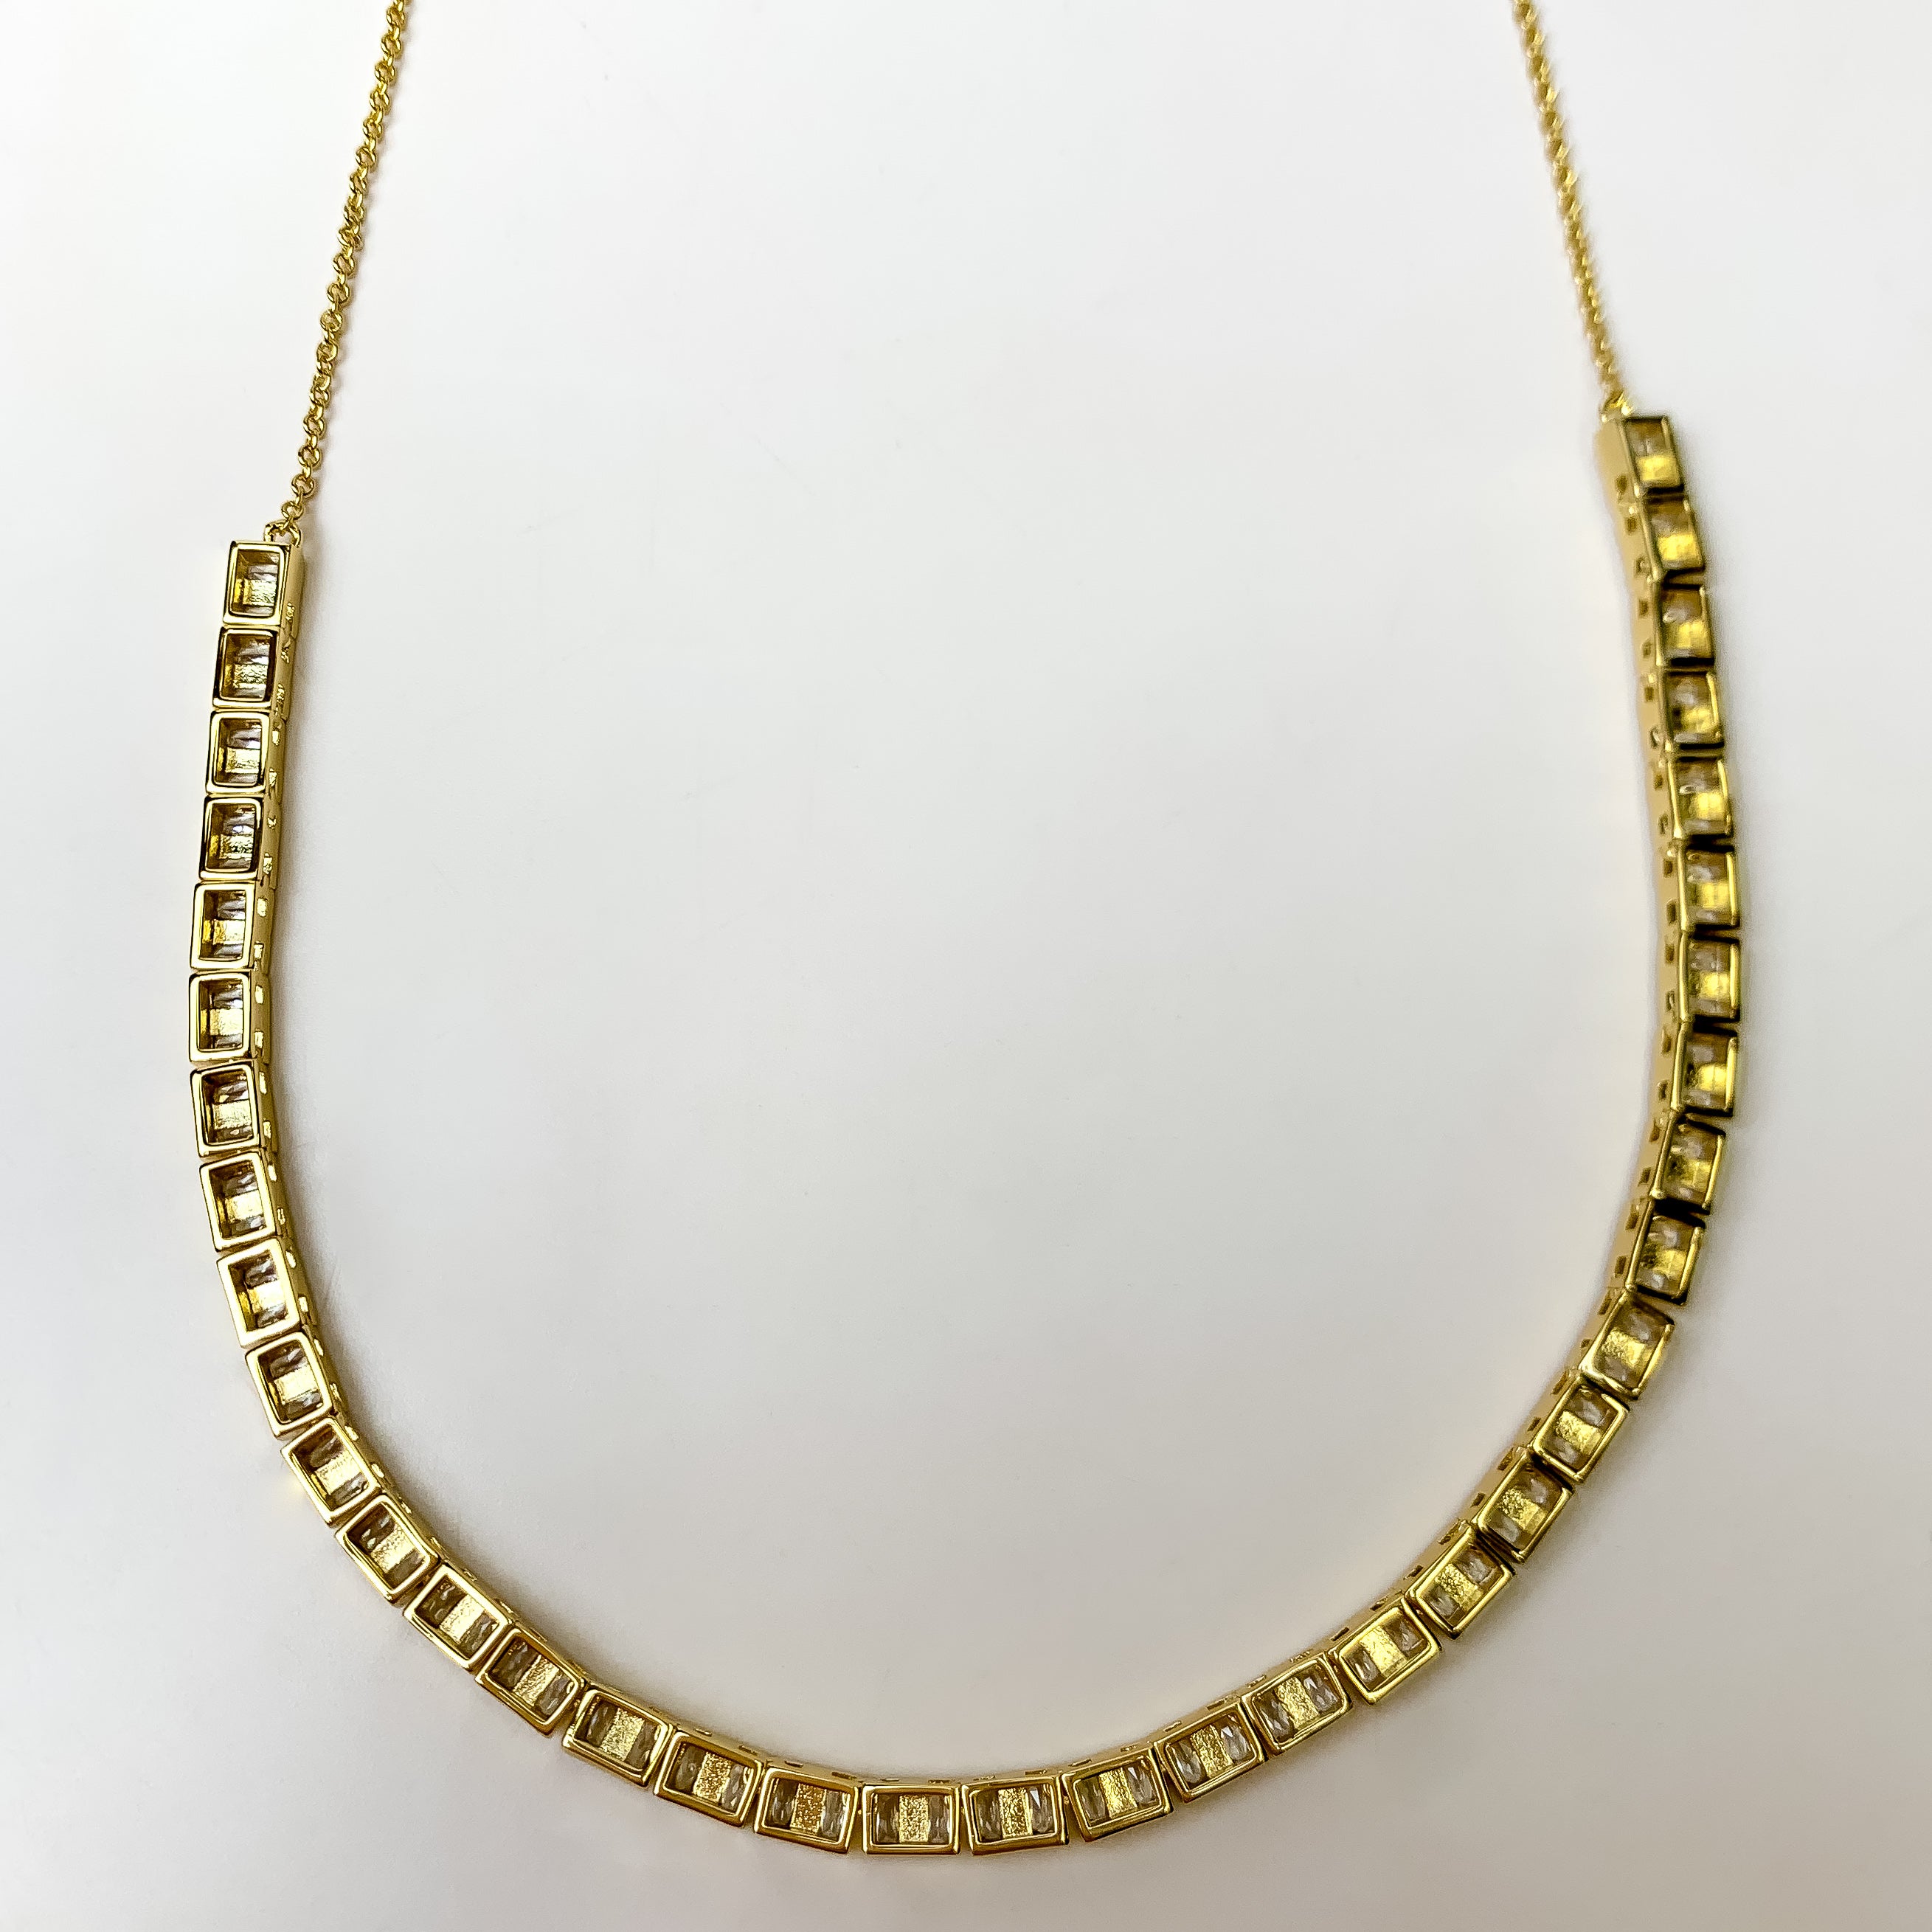 This Gracie Gold Tennis Necklace in White by Kendra Scott is pictured on a white background.